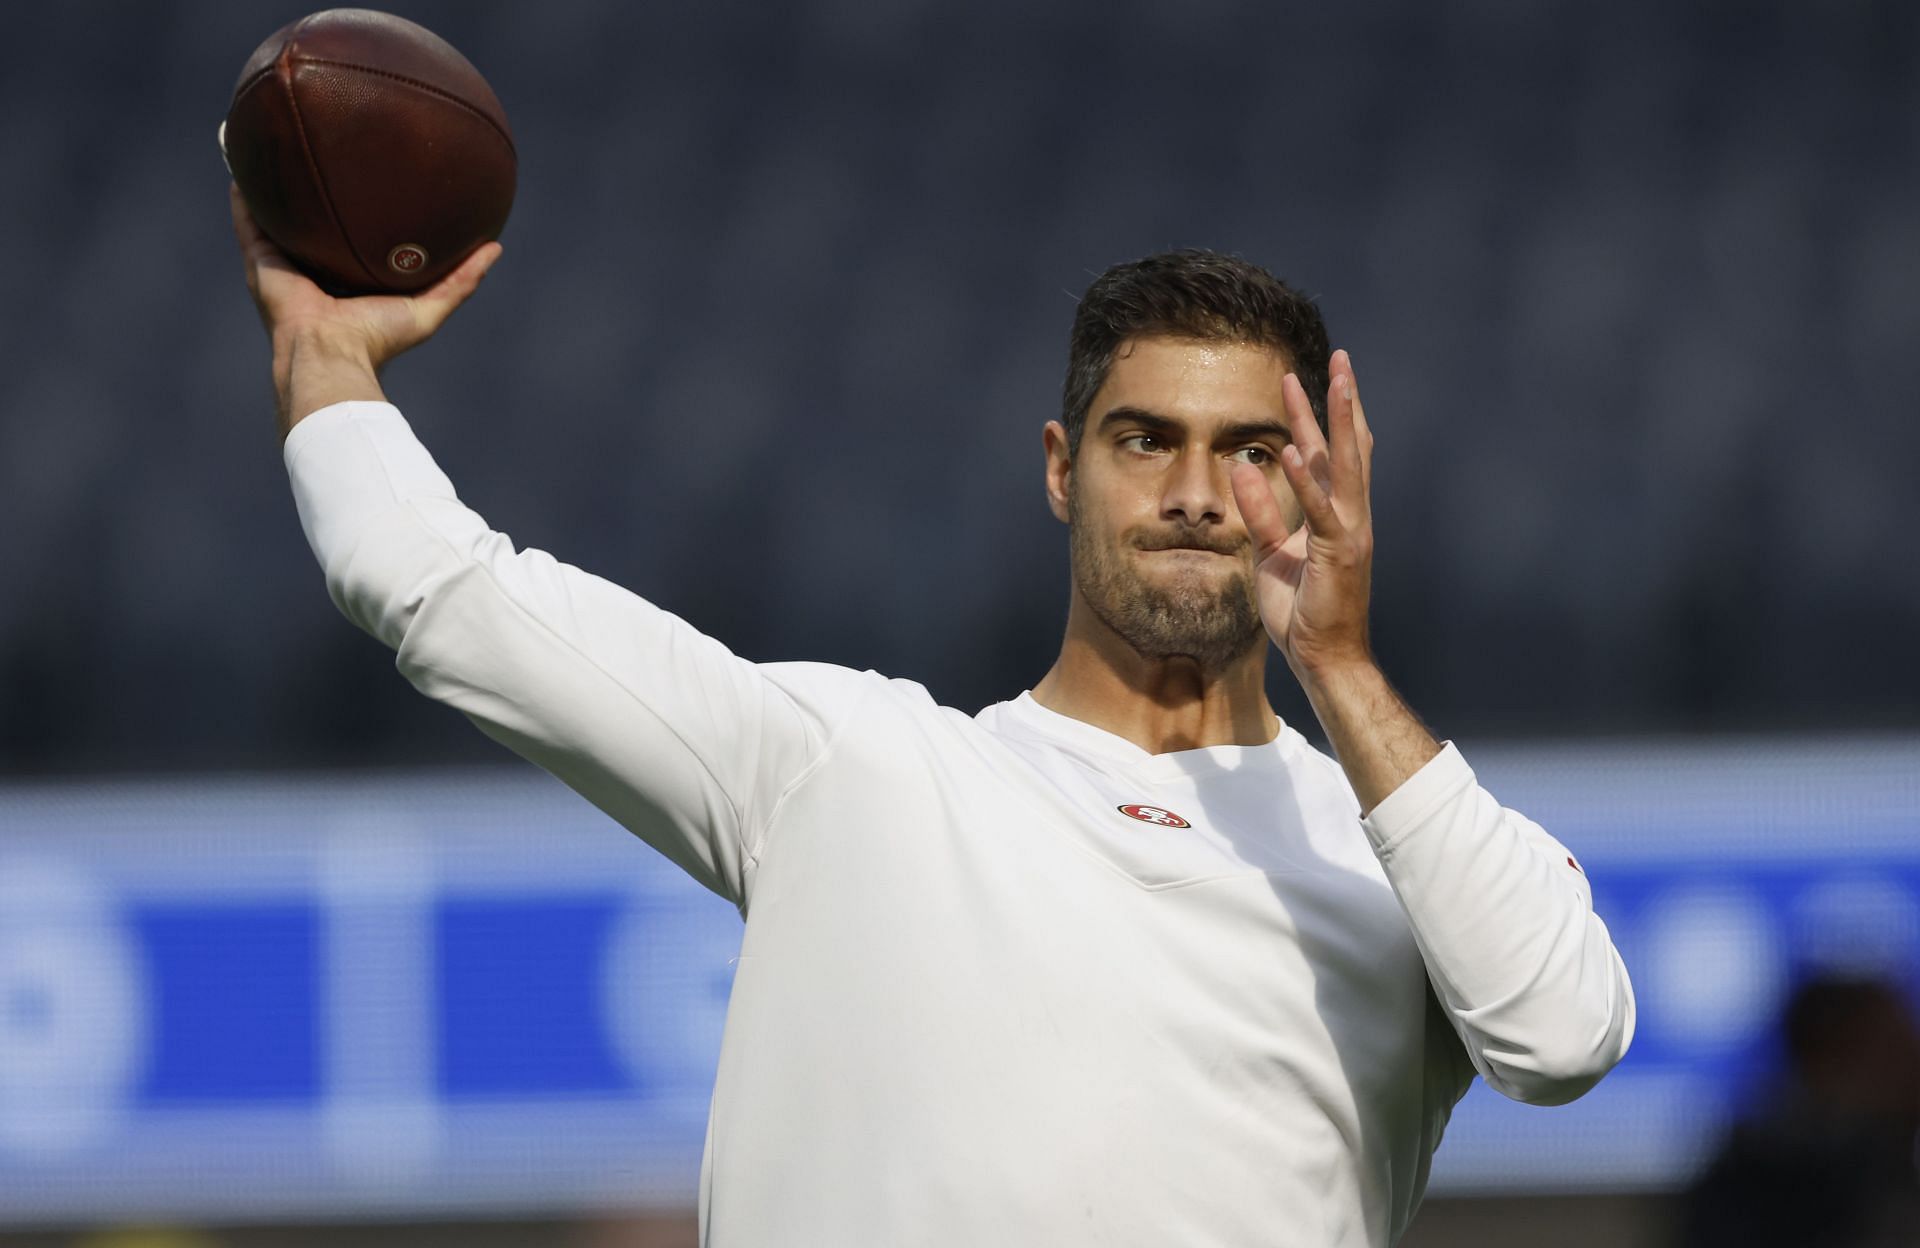 There has been very few interested parties in trading for Jimmy Garoppolo in 2022